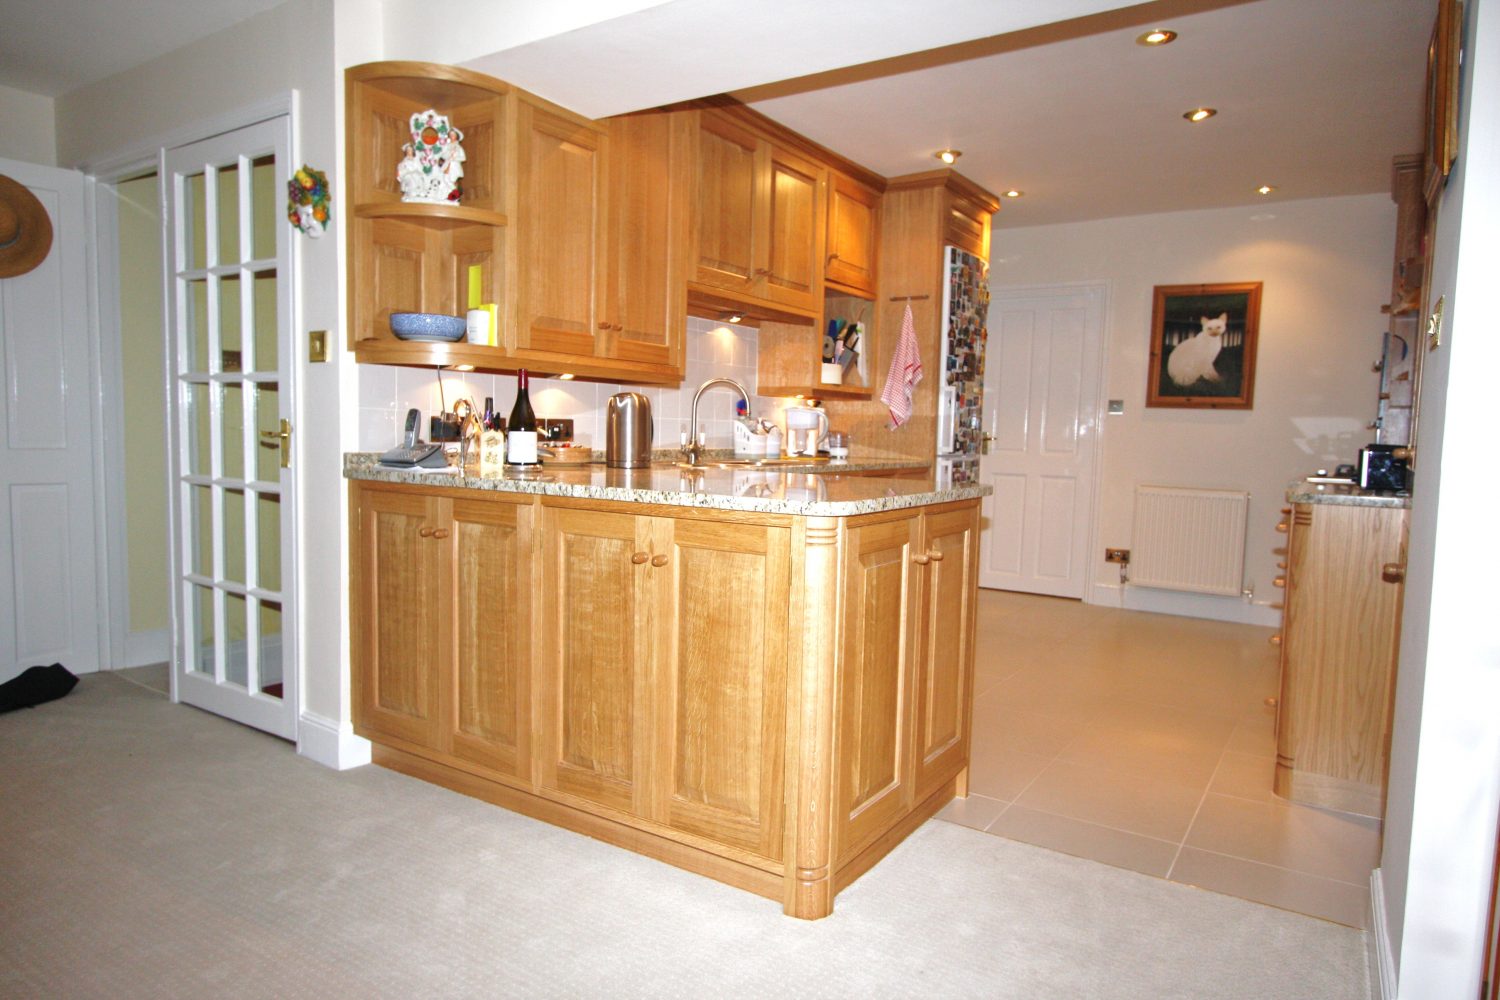 Breakfast bar base with wall units fitted under beam